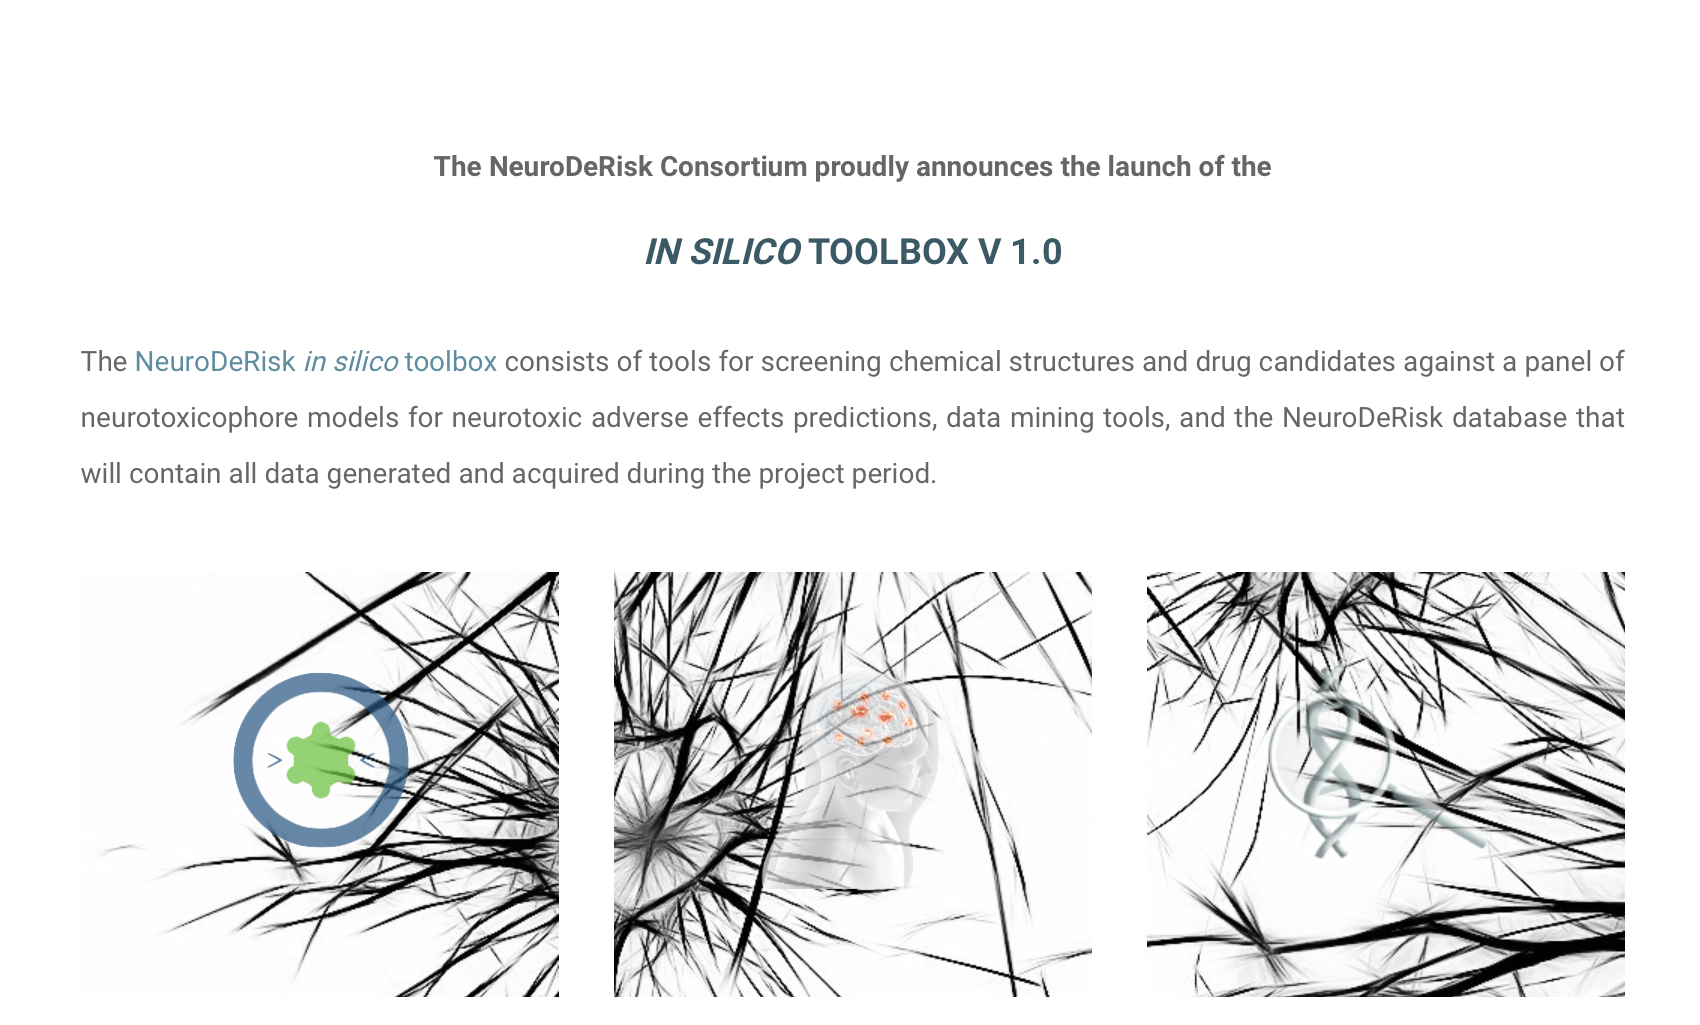 NeuroDeRisk in silico Toolbox Released Today